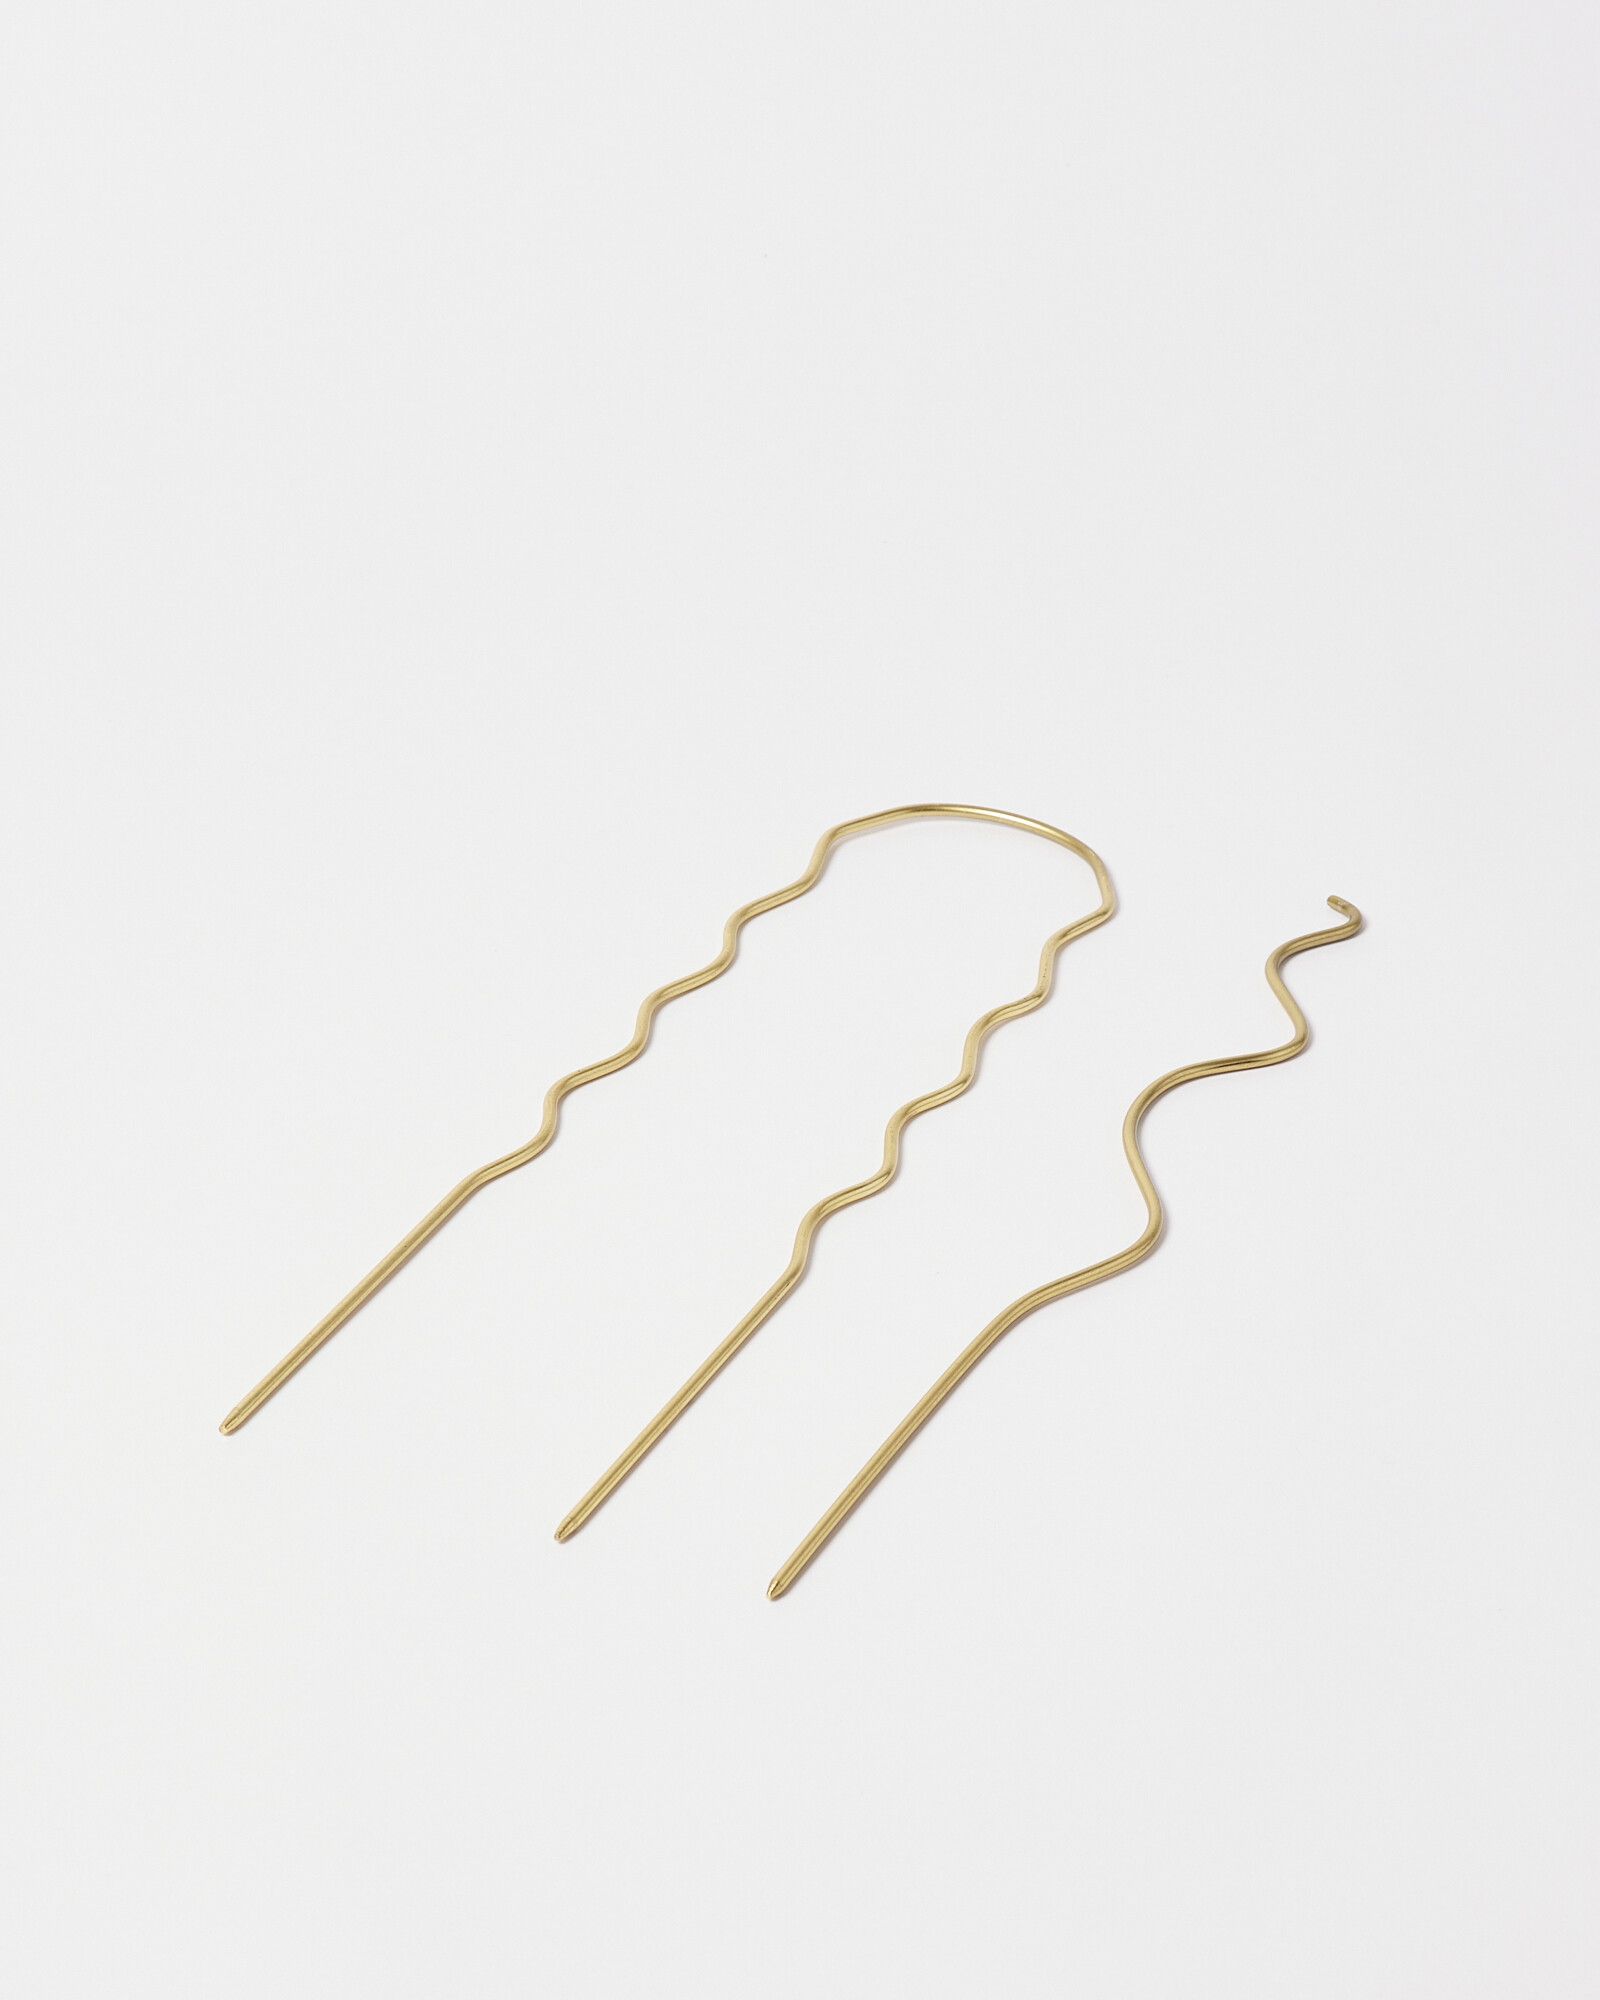 Wiggle Gold Metal Plant Supports Set of Two | Oliver Bonas